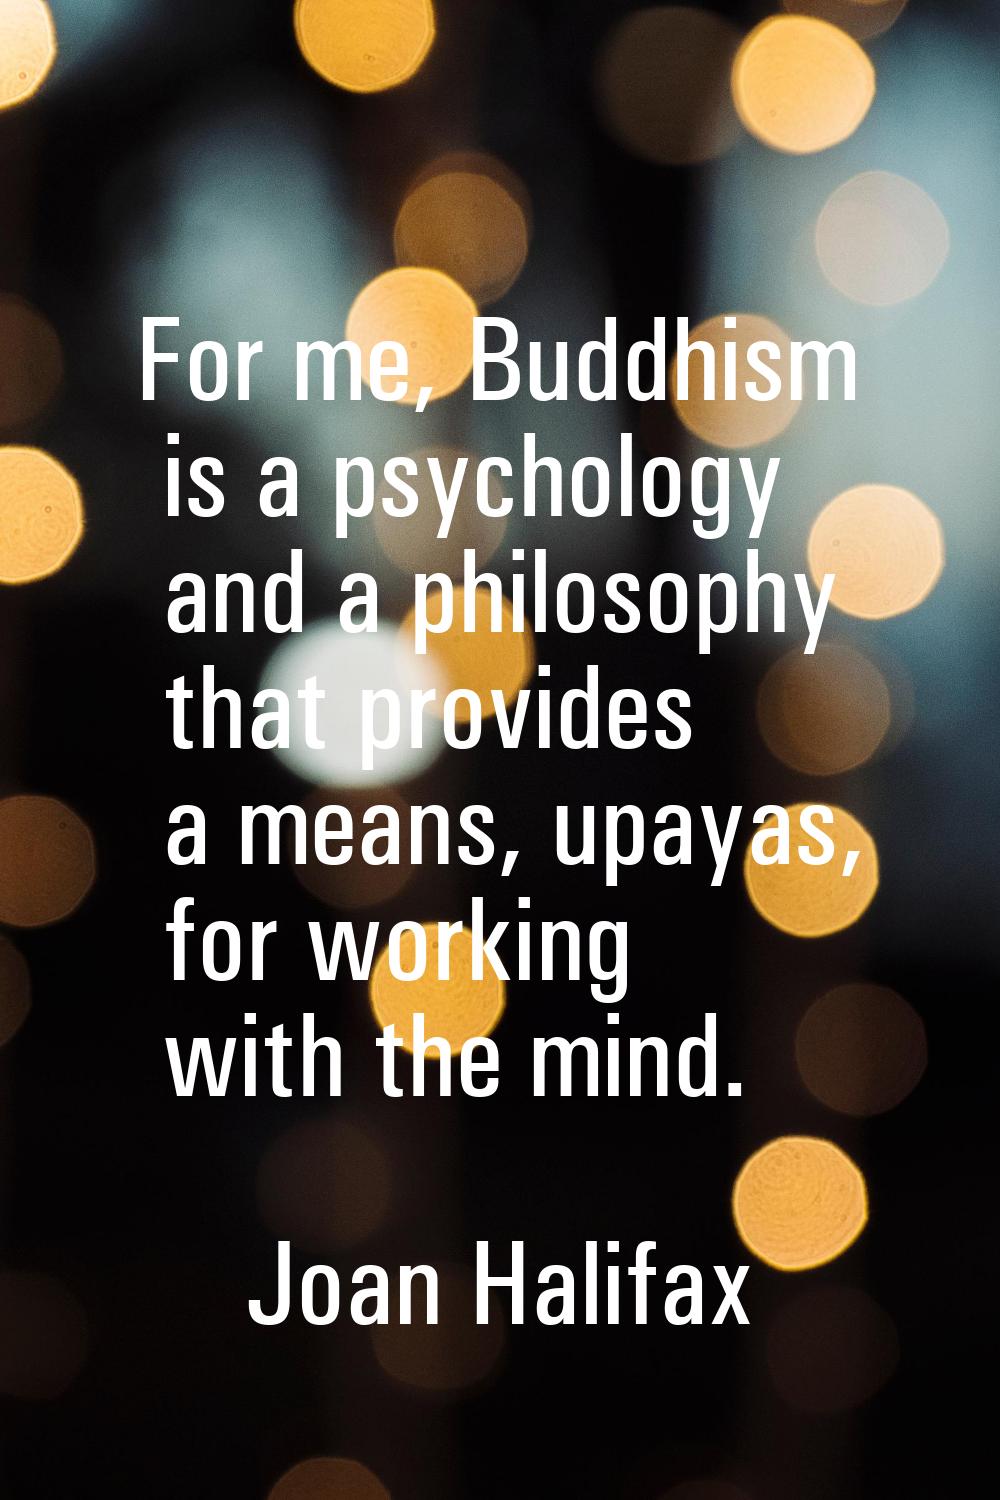 For me, Buddhism is a psychology and a philosophy that provides a means, upayas, for working with t